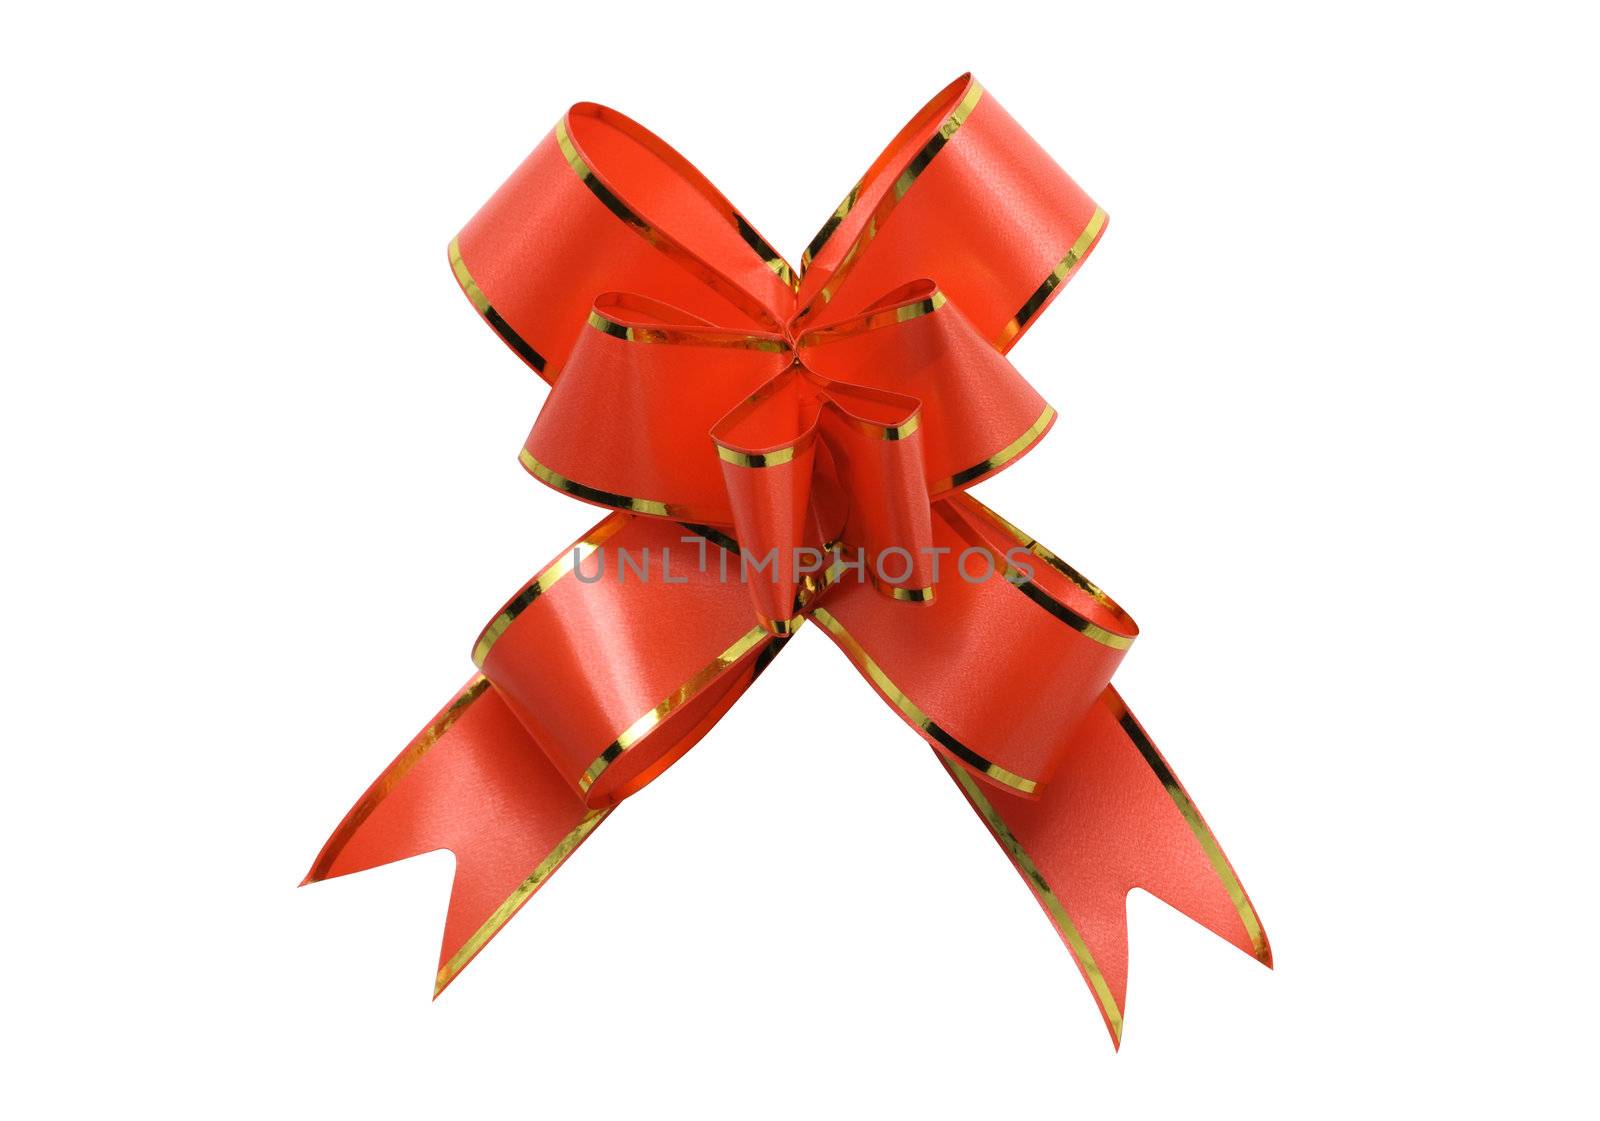 Nice red gift bow isolated on white background with clipping path